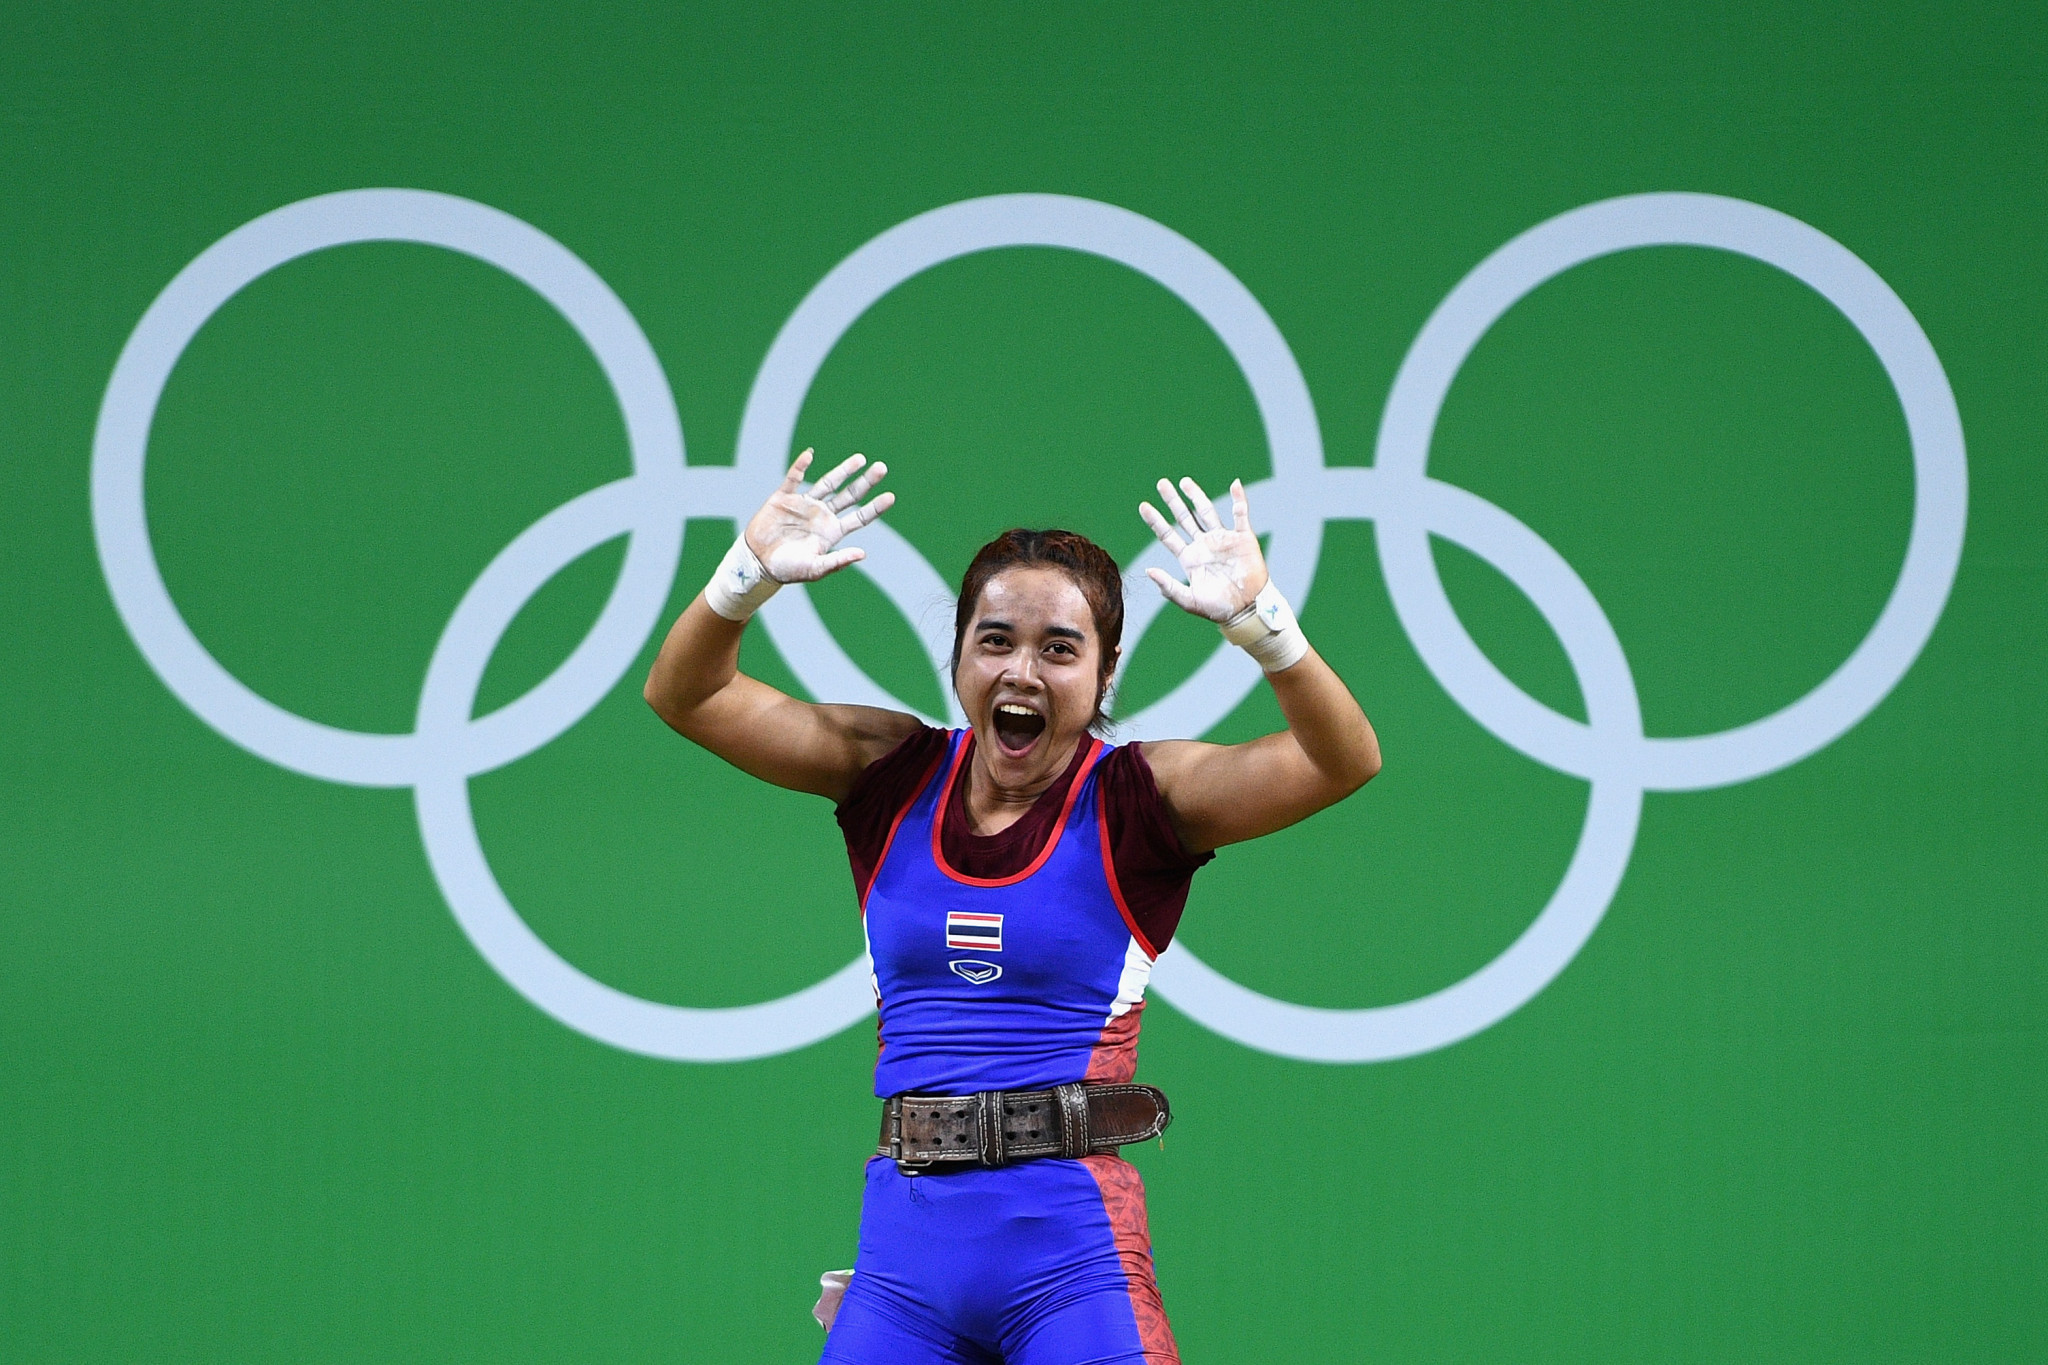 Thailand could lose World Championships after six weightlifters test positive at IWF's flagship event